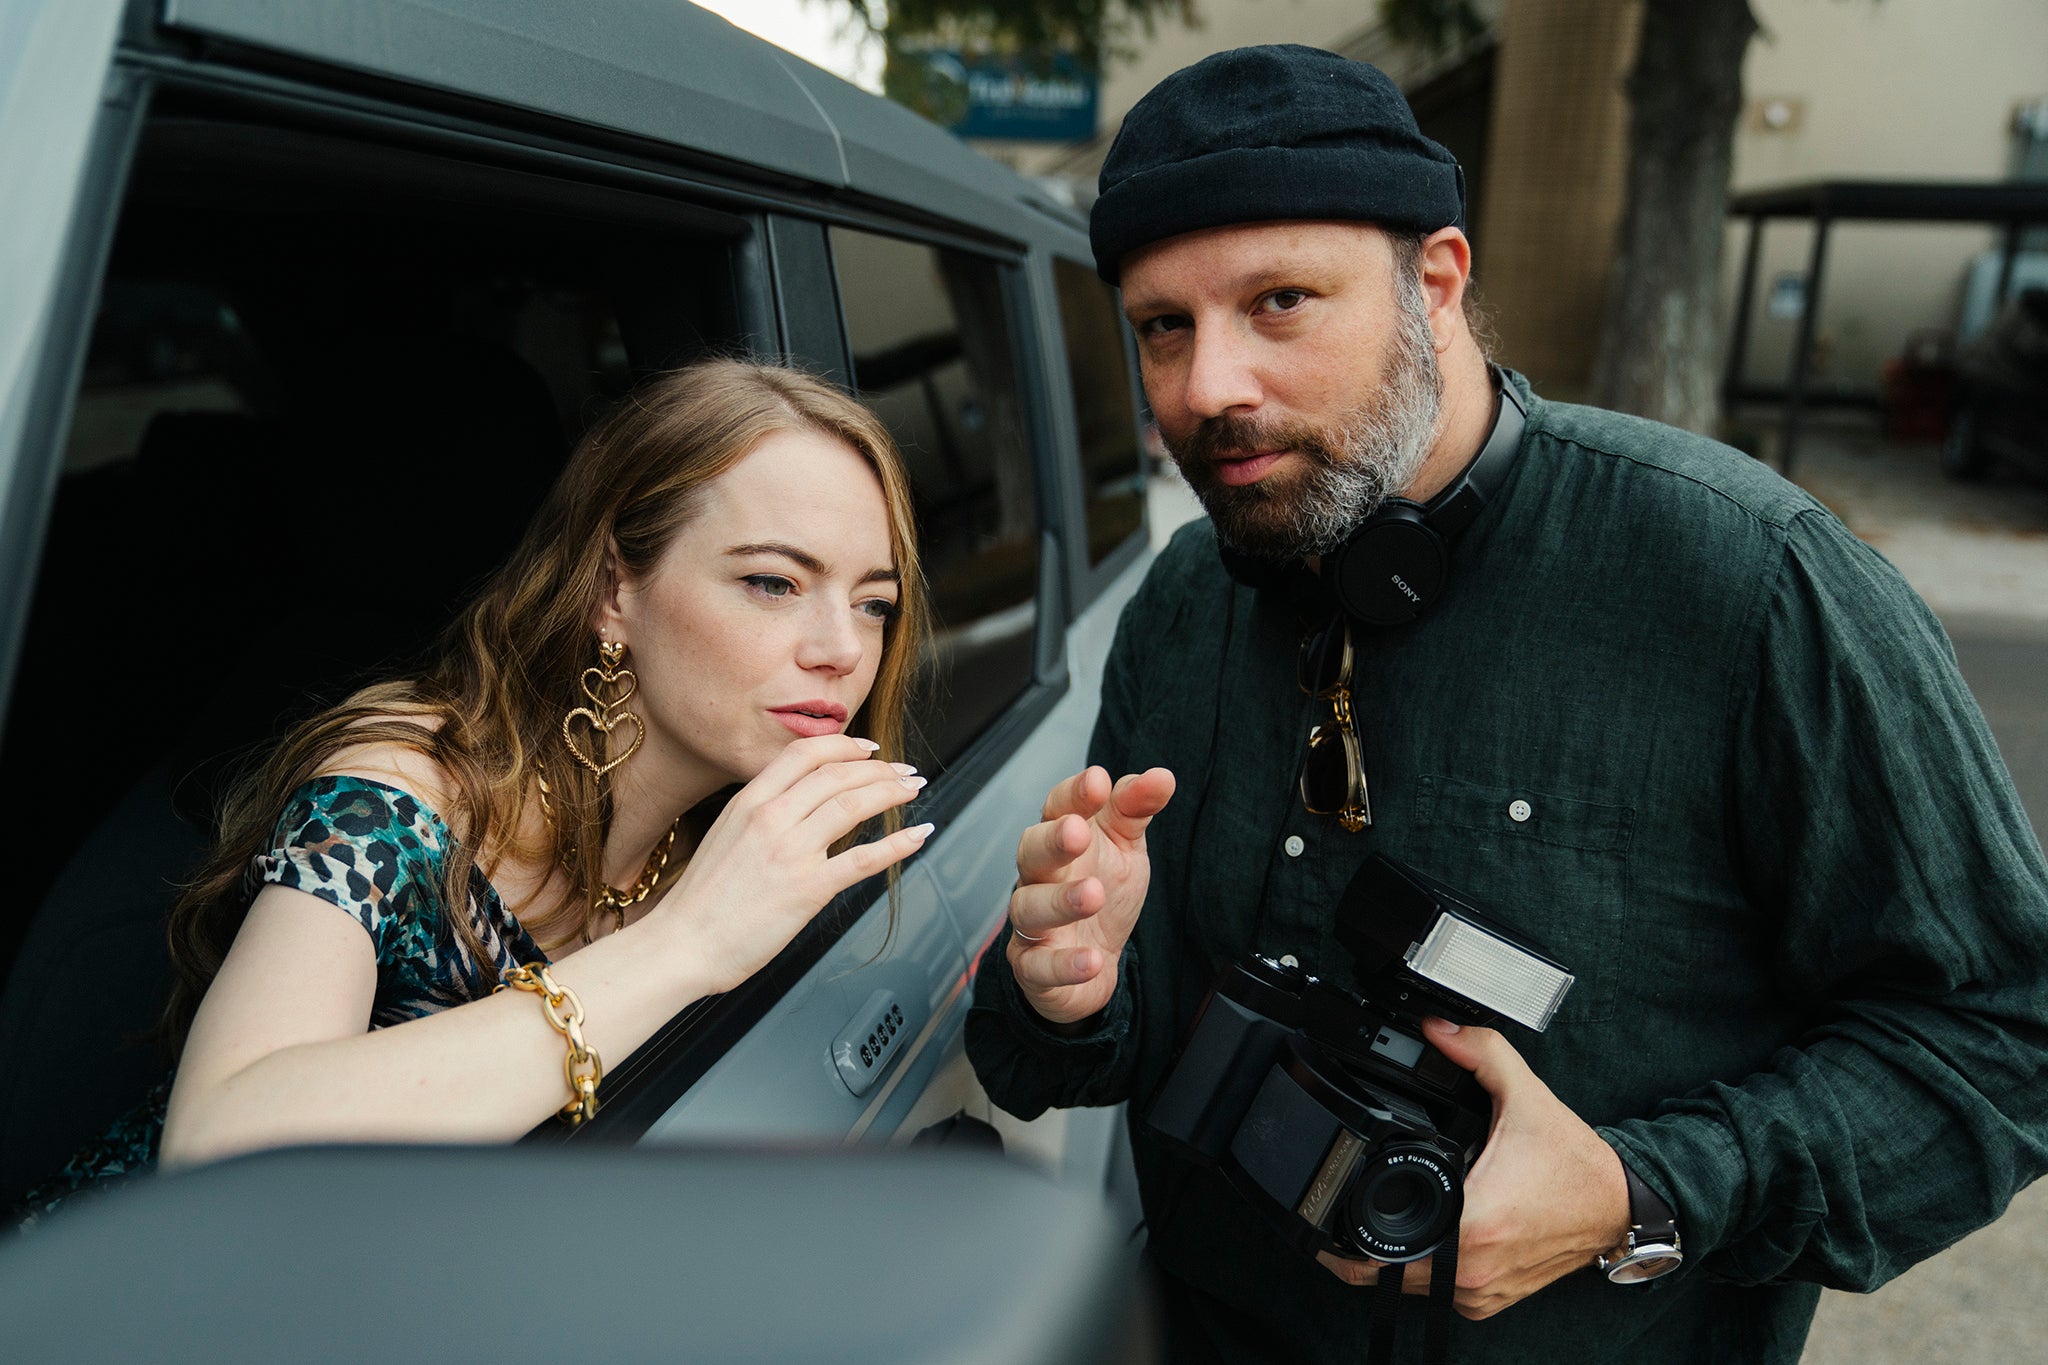 ‘I thought he would be much more intense than he actually is in person’: Emma Stone and Yorgos Lanthimos on the set of ‘Kinds of Kindness’